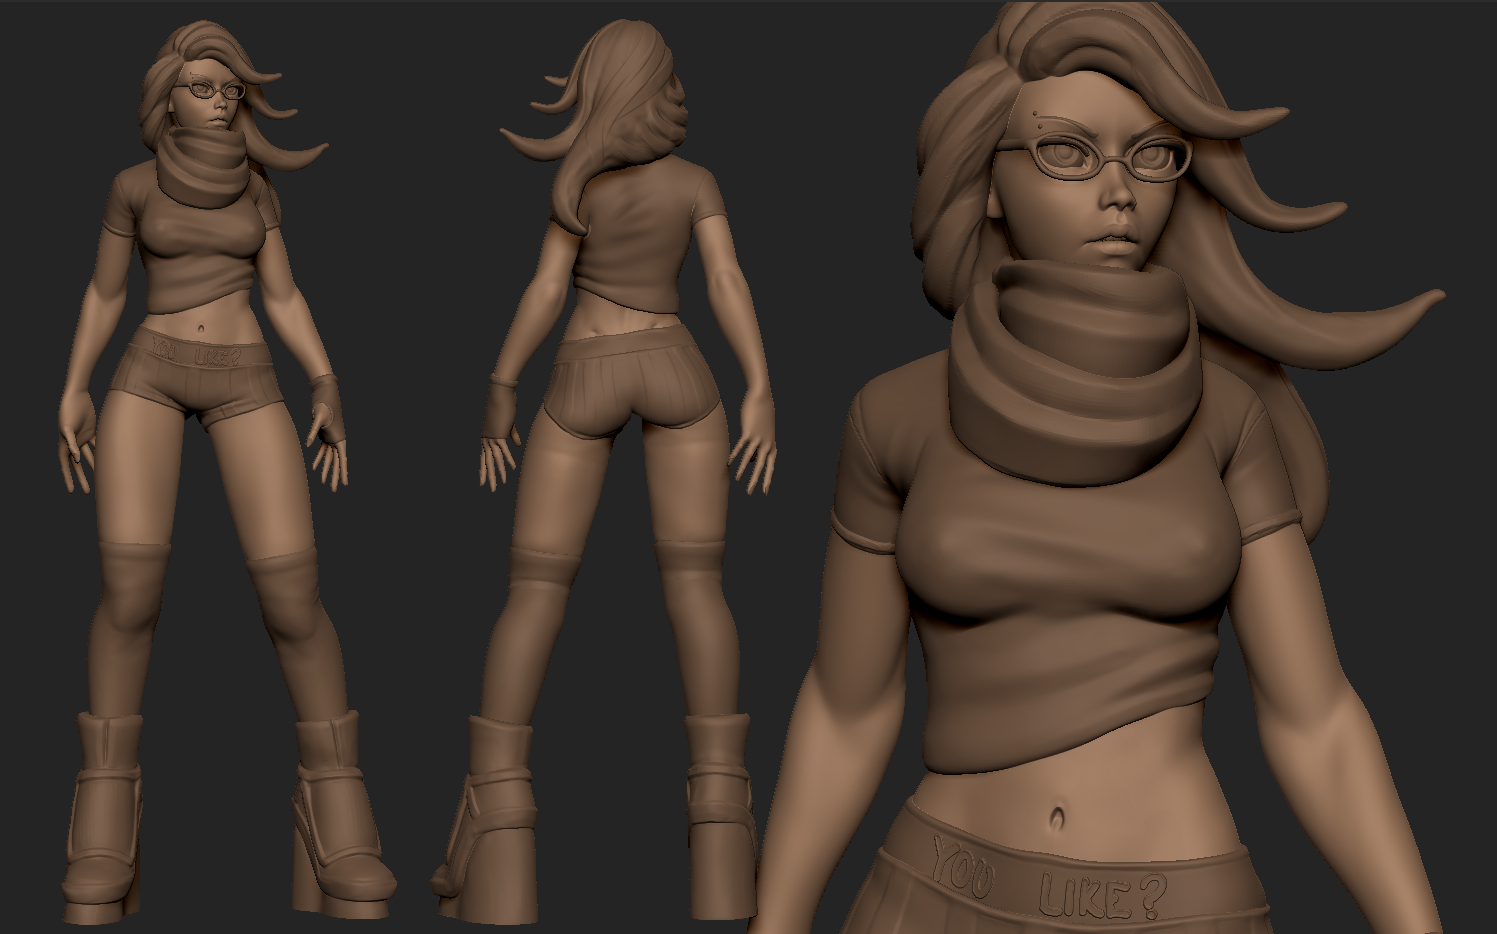 sunday_sculpt_wip_by_andra_arts-d7og2ps.png